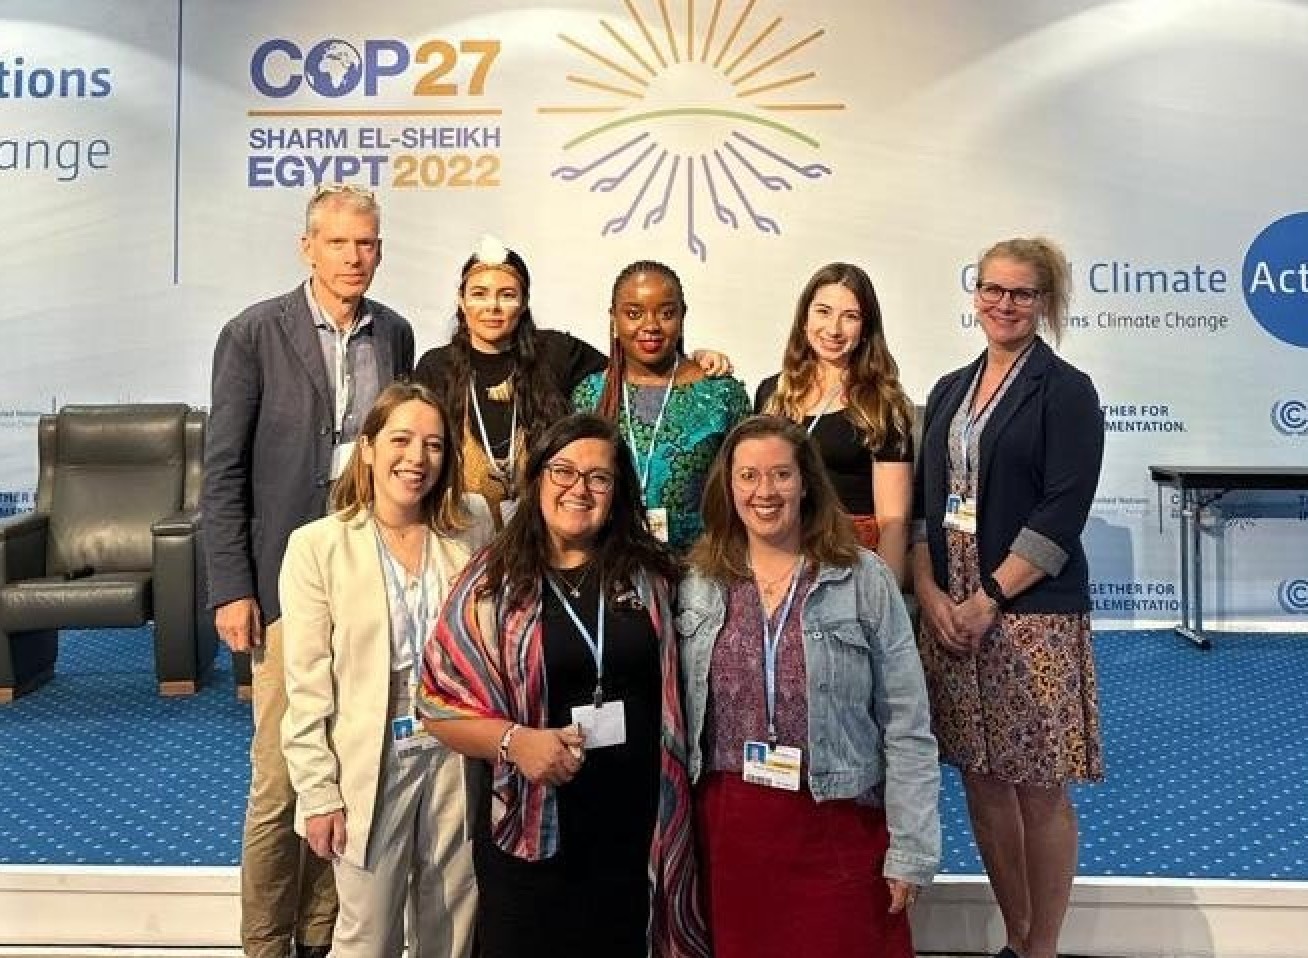 Dr Lawrance poses with a group of colleagues in front of a COP27 sign